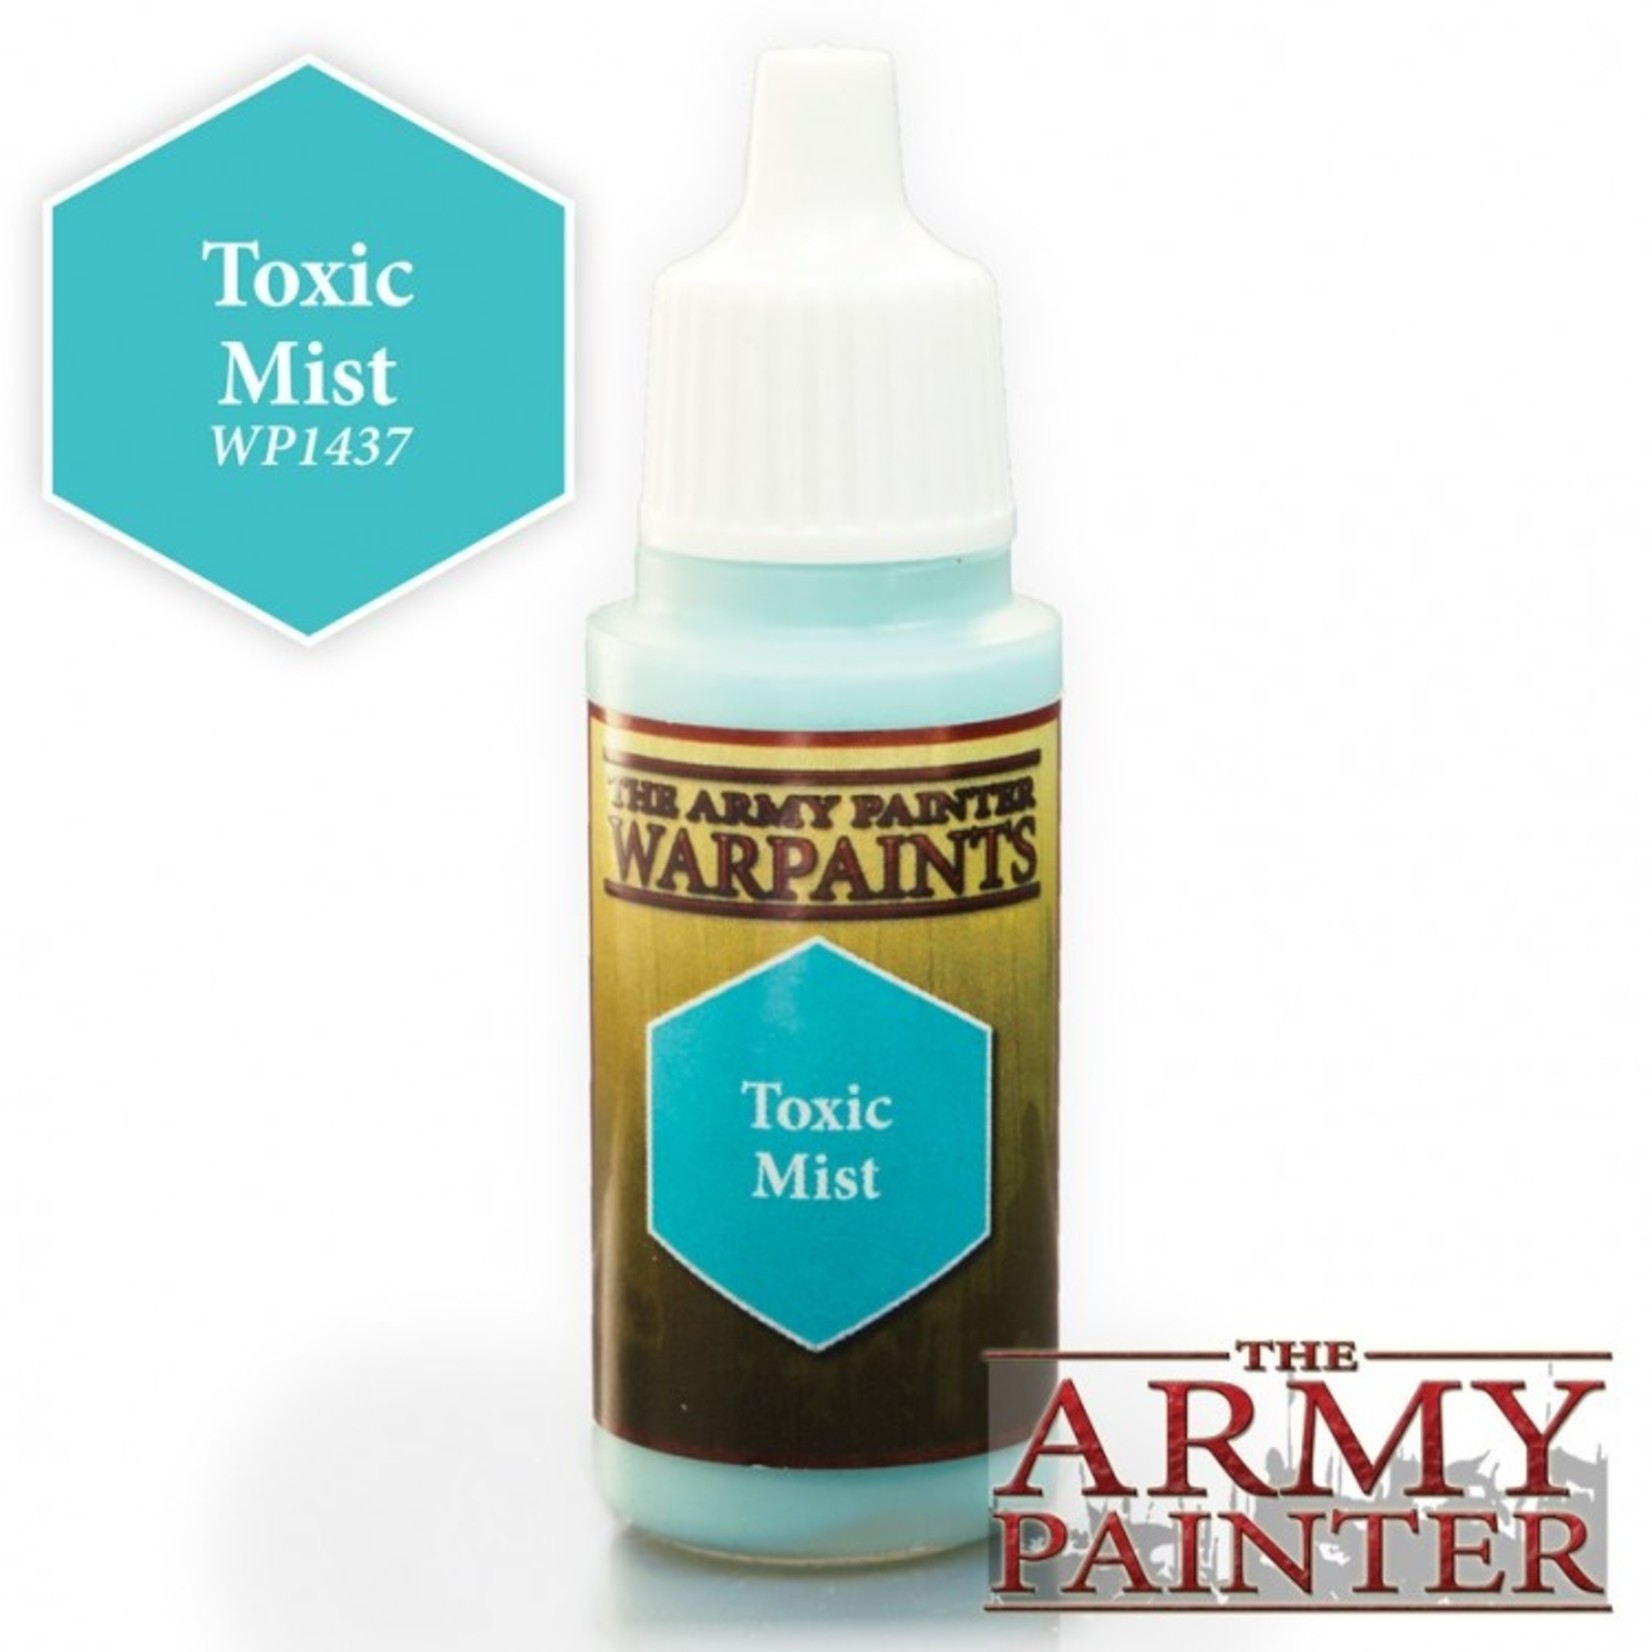 The Army Painter The Army Painter Toxic Mist 18ml